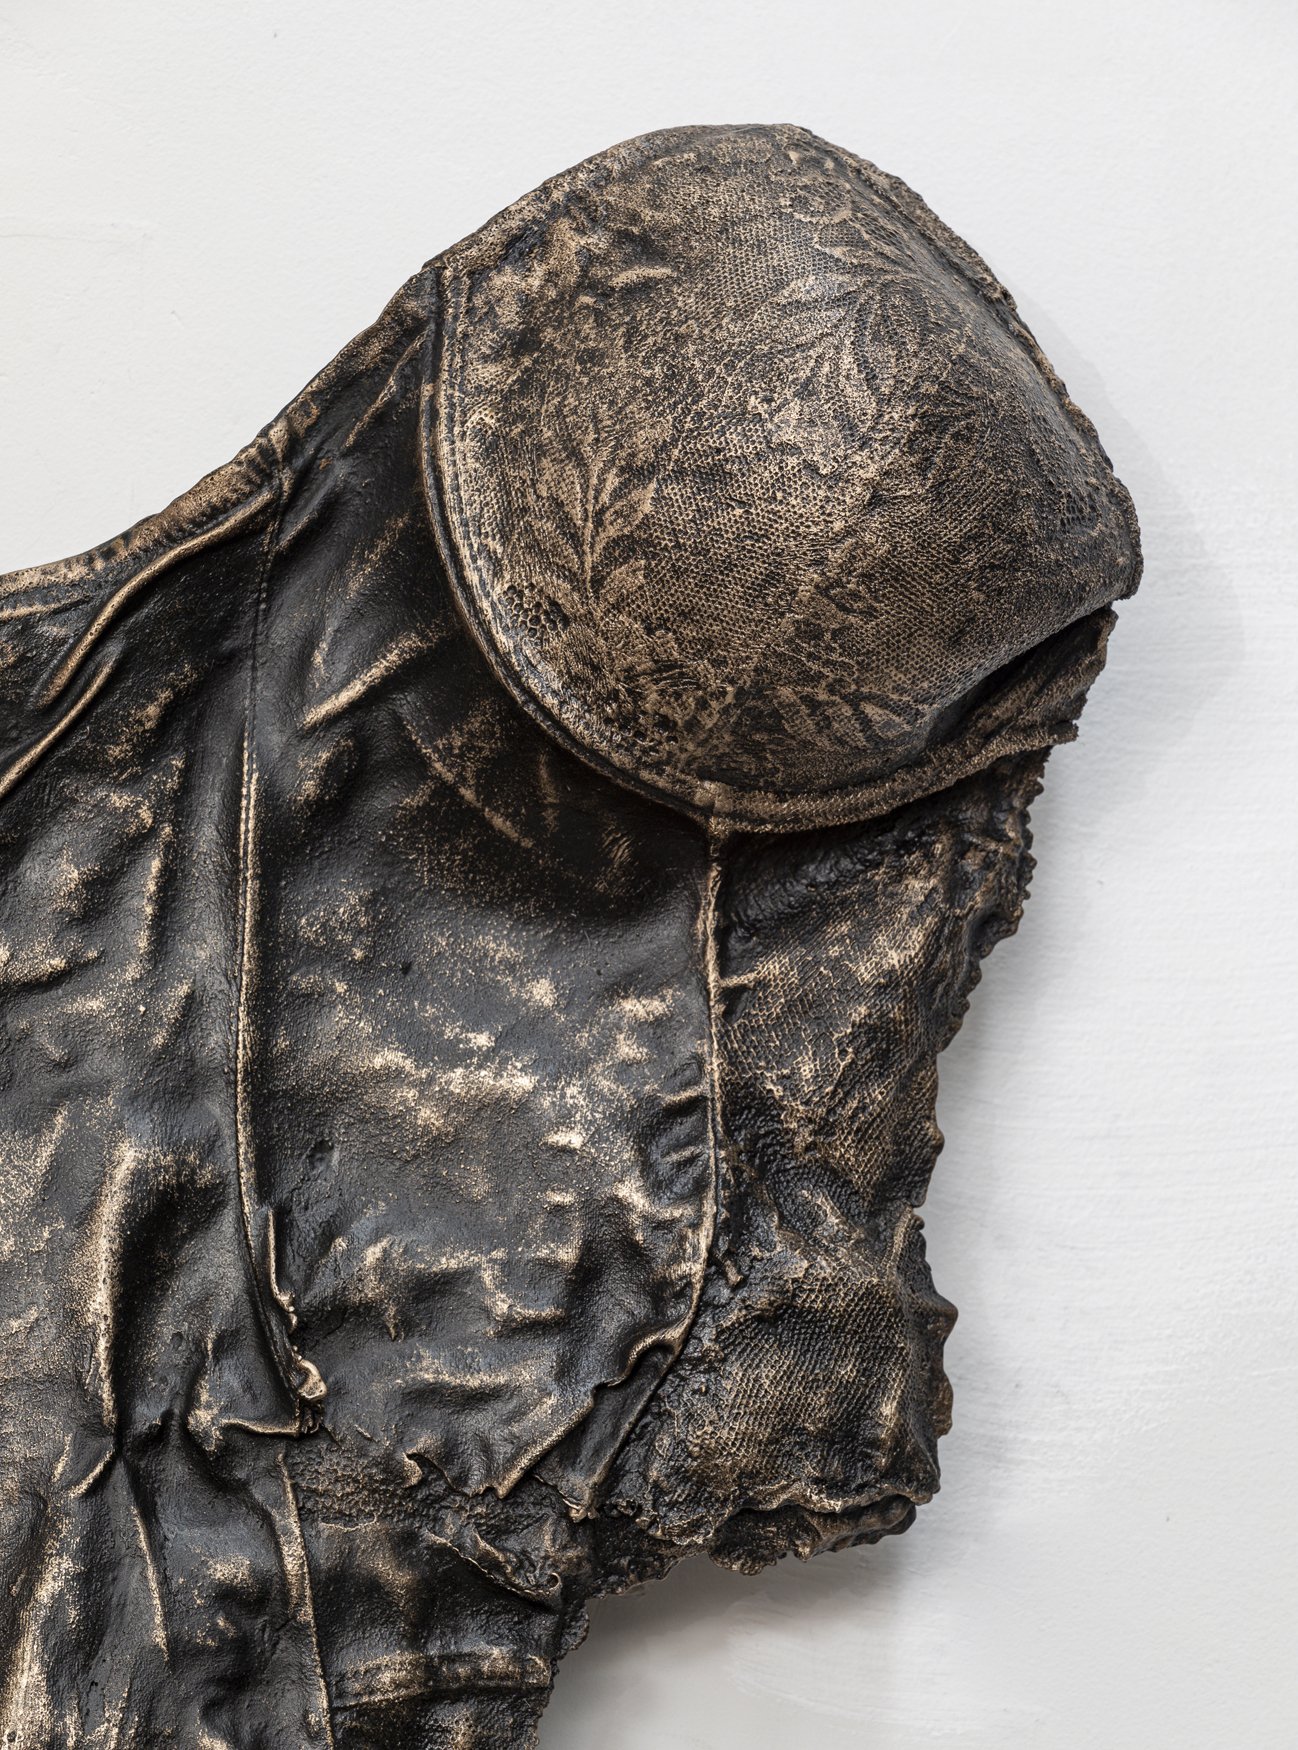  Marsha Pels,  Woman With Her Torso Cut  (detail) ,  2019. Patined cast bronze. 38 x 30 x 5 inches. 